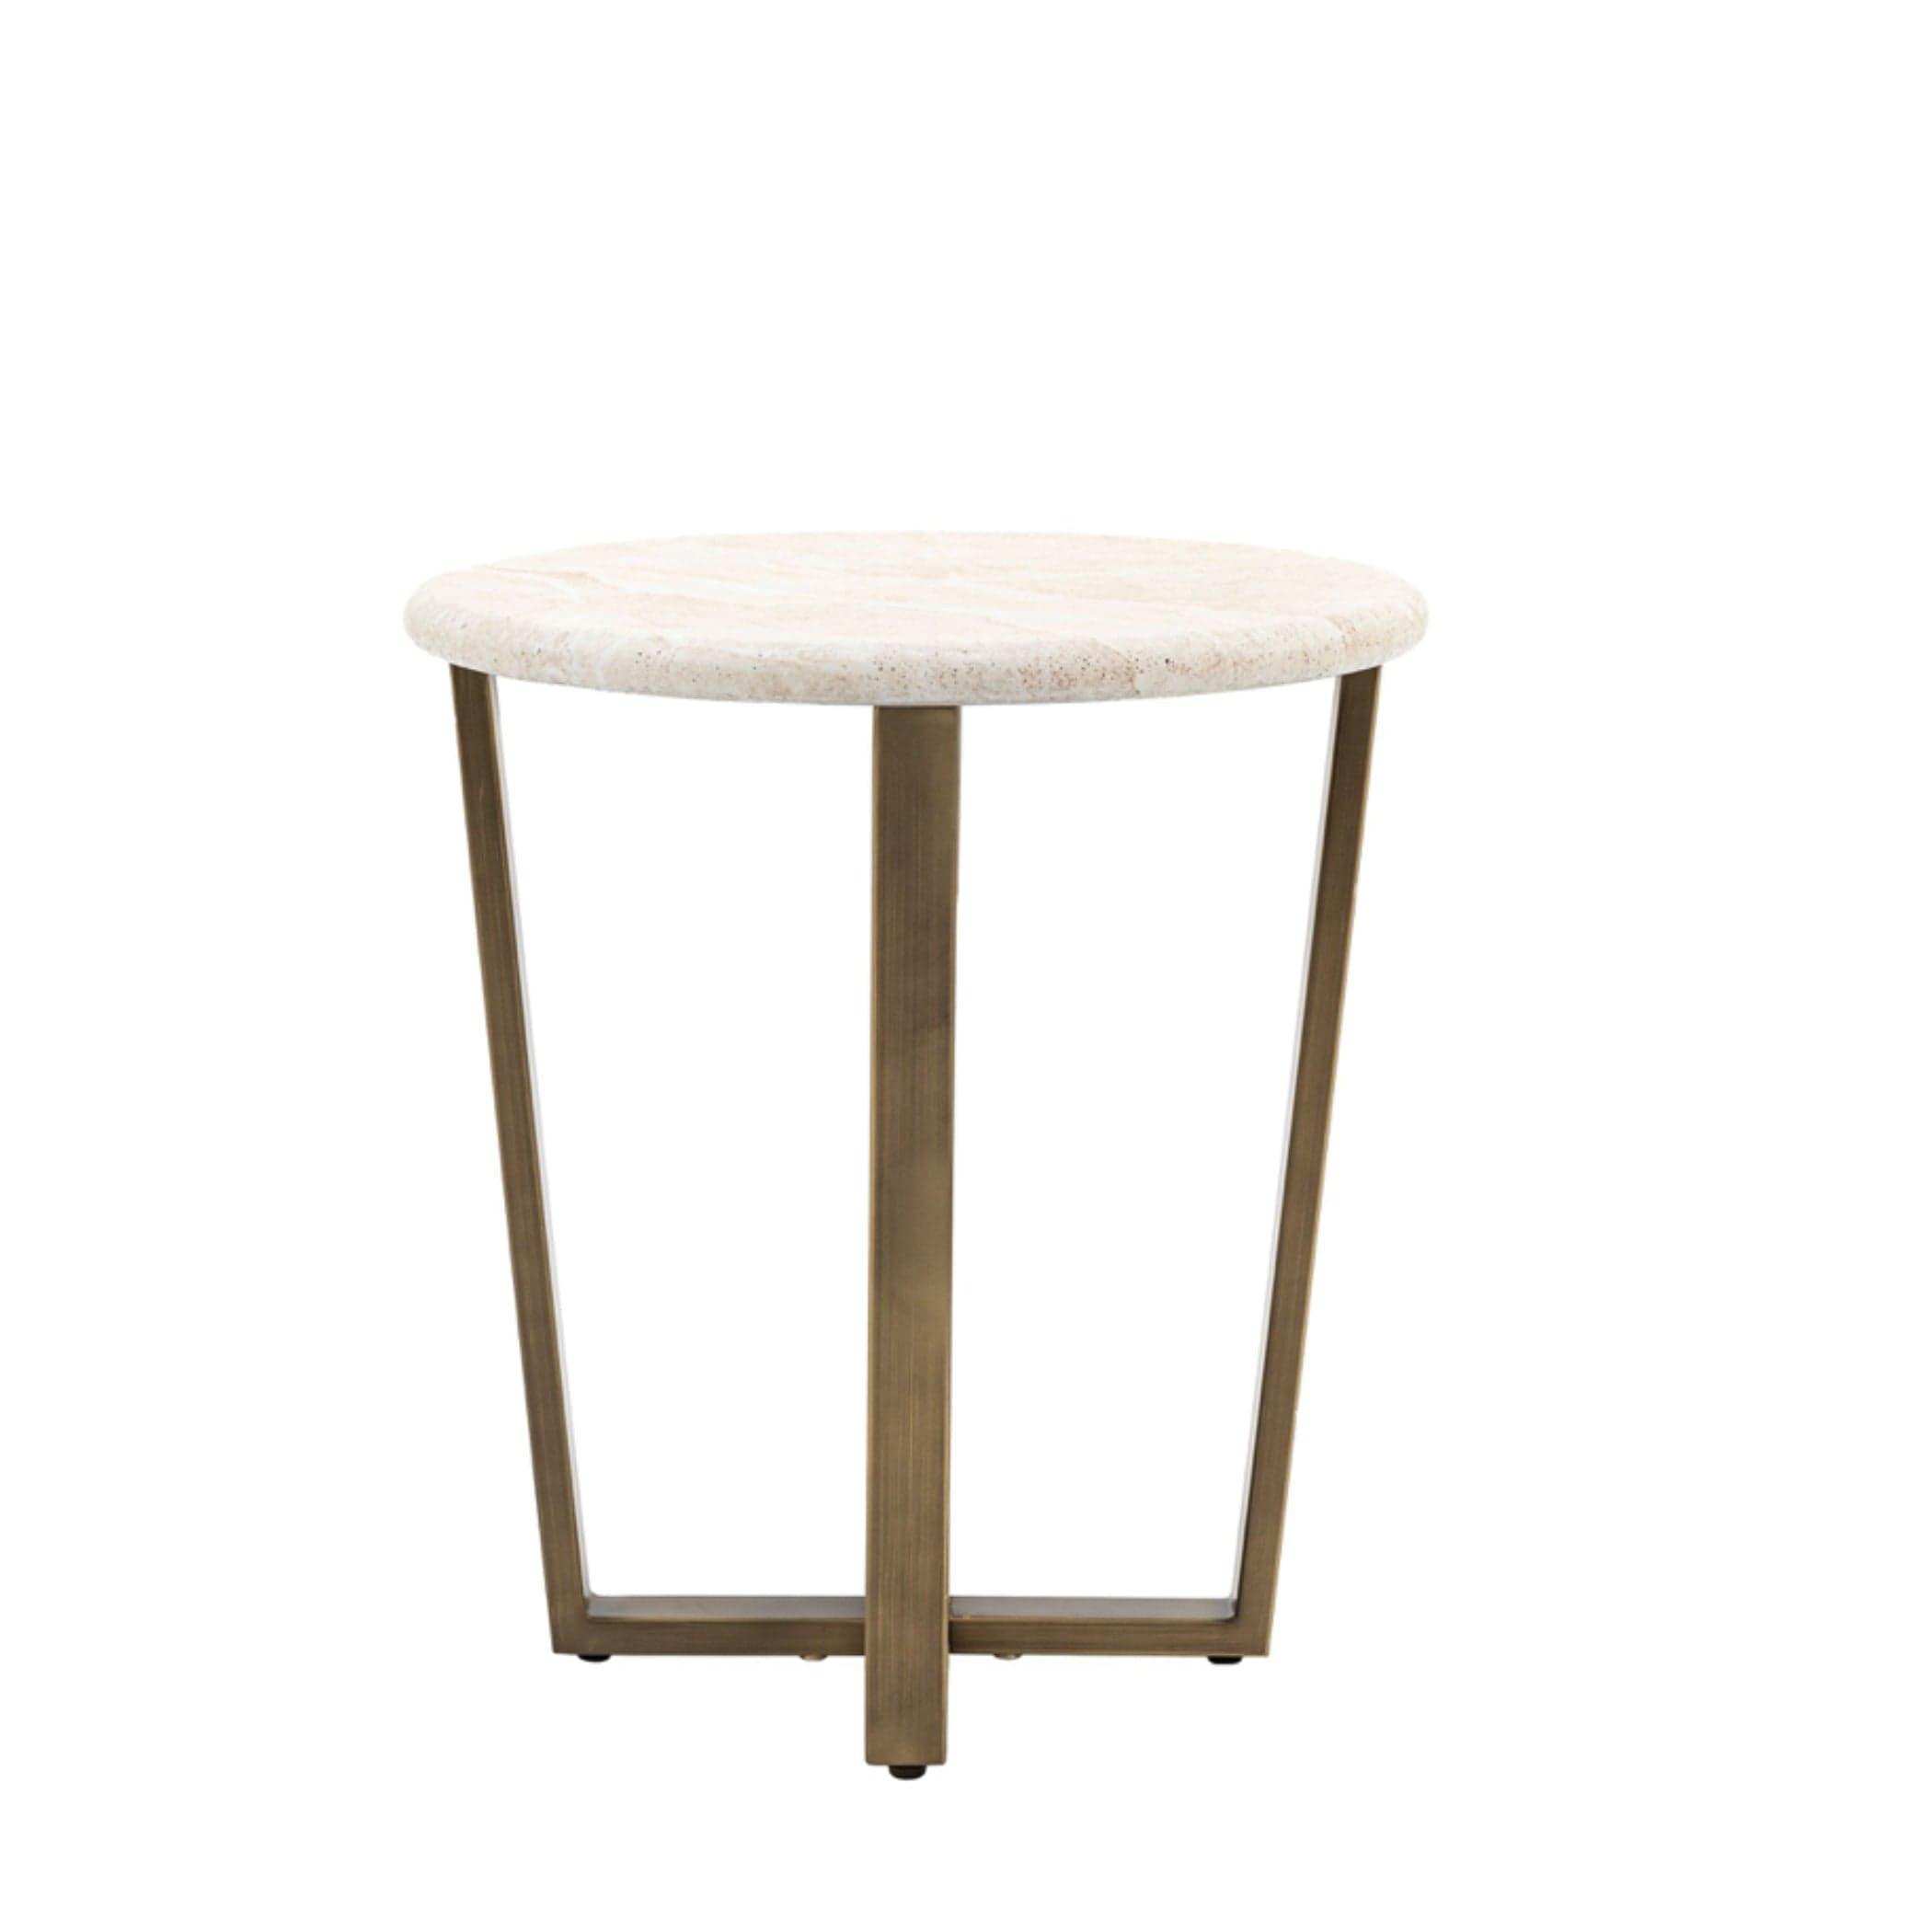 Faux Travertine Topped Antique Bronze Legged Side Table - The Farthing